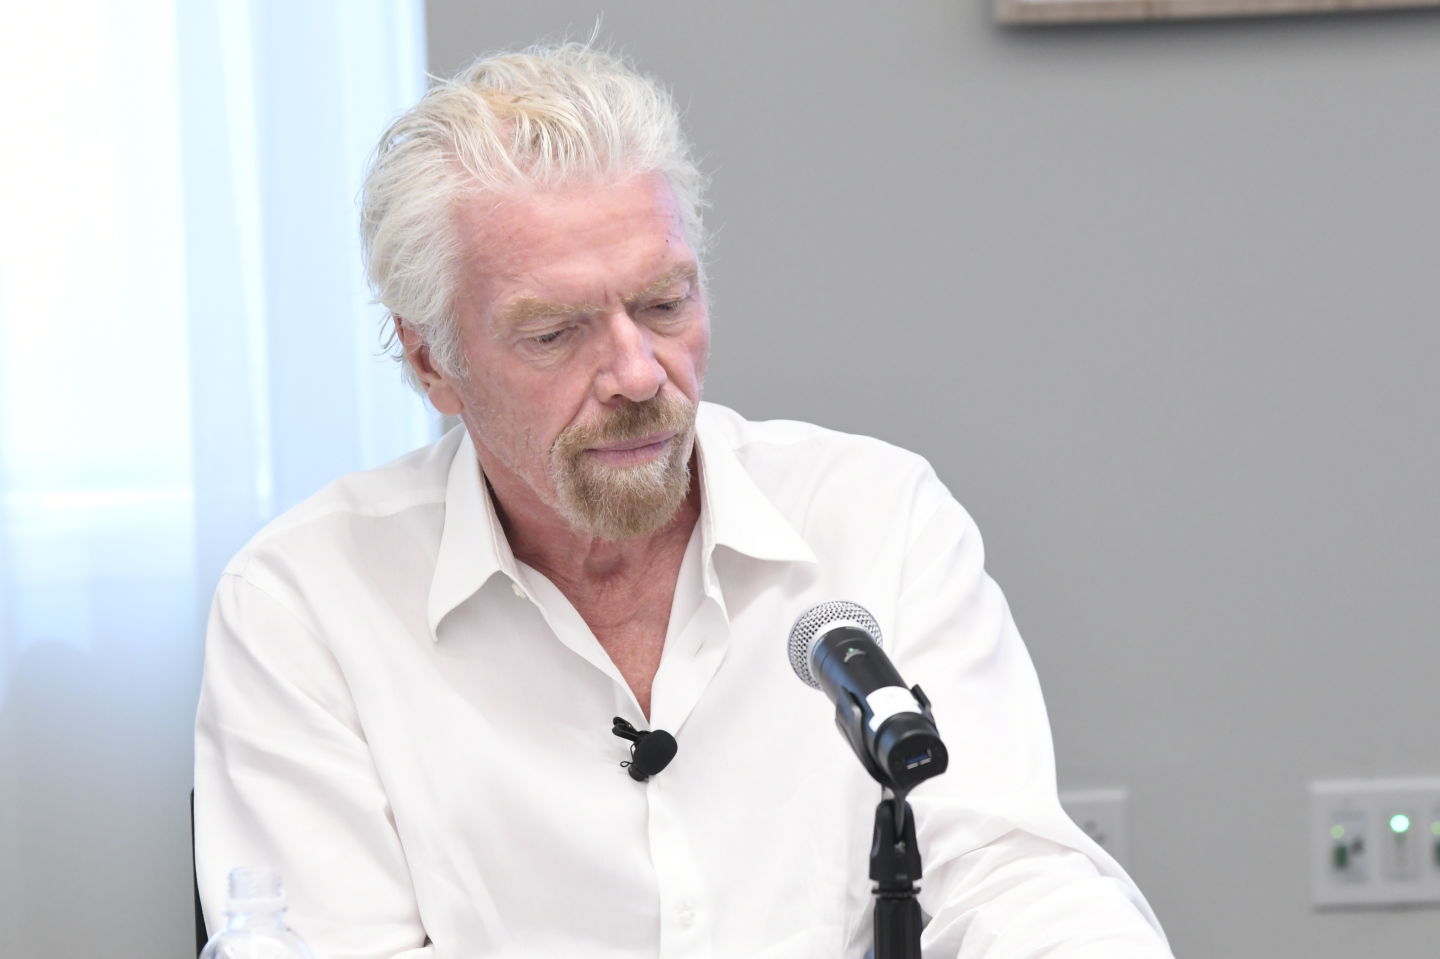 Richard Branson wearing a white shirt at a panel discussion